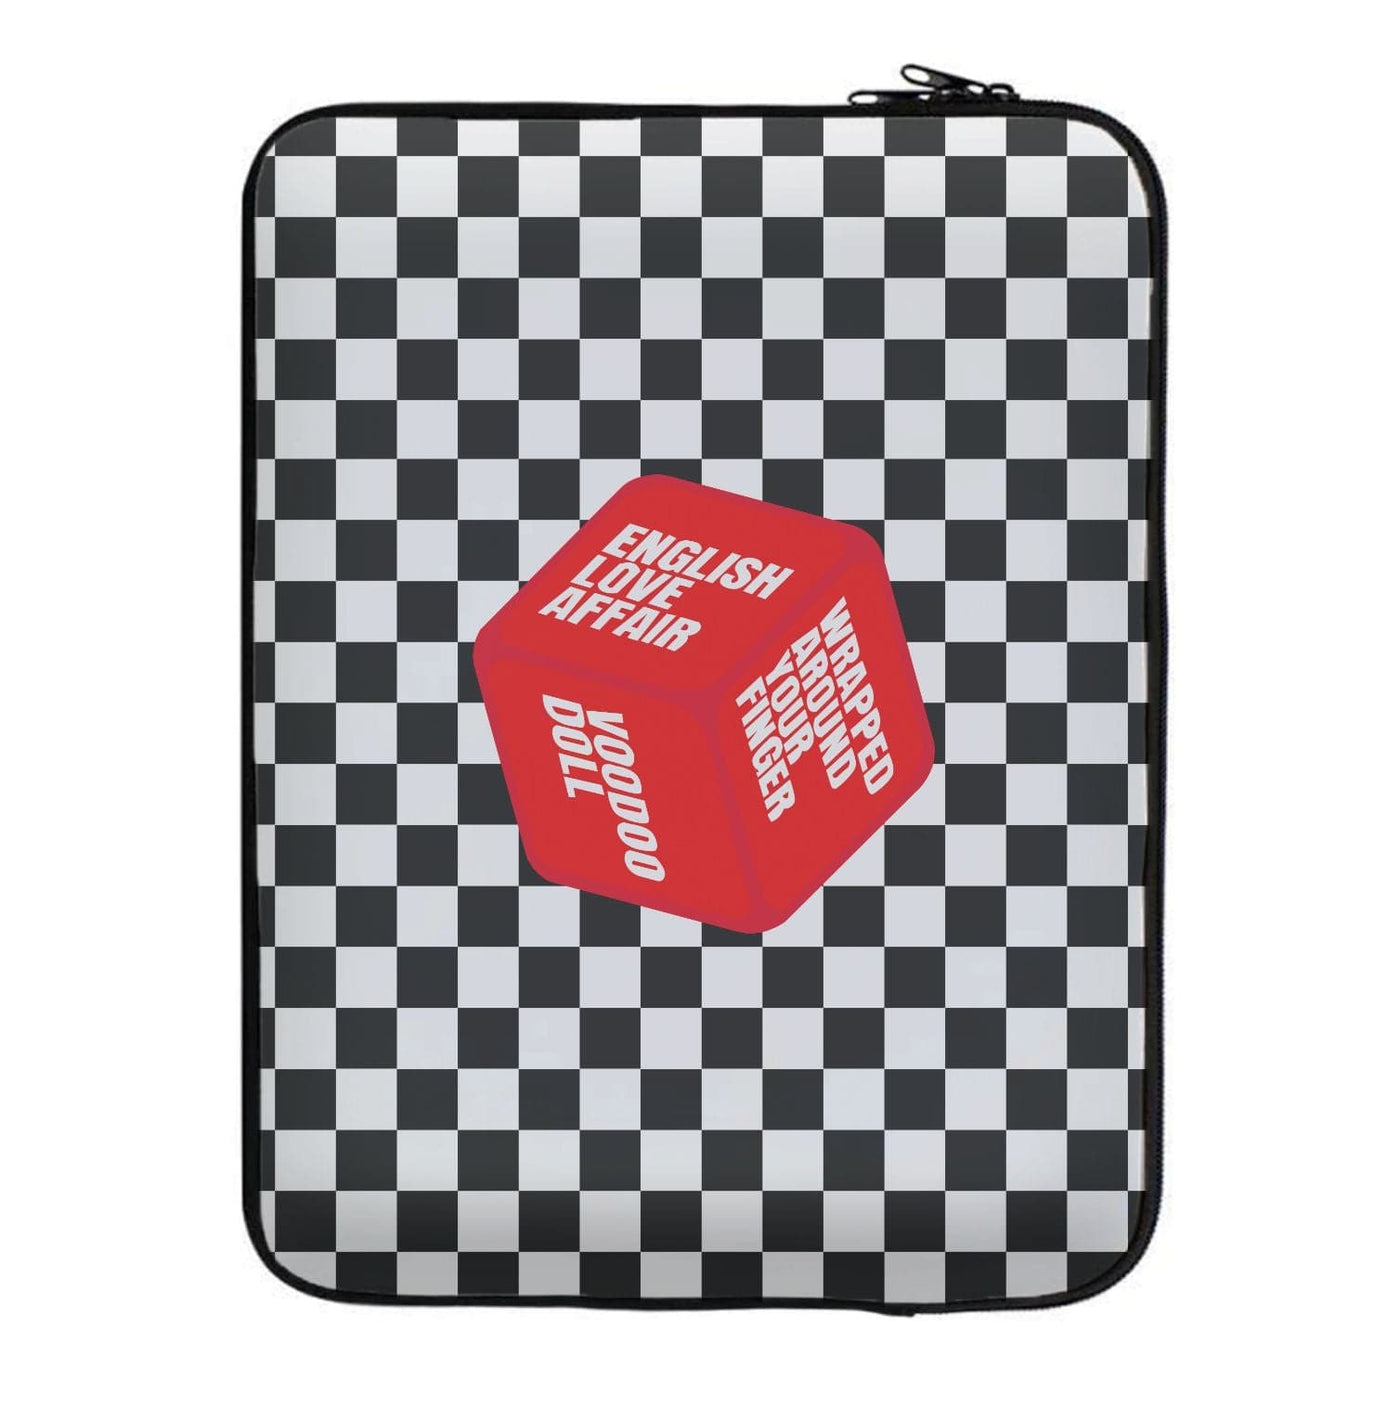 Dice - 5 Seconds Of Summer  Laptop Sleeve